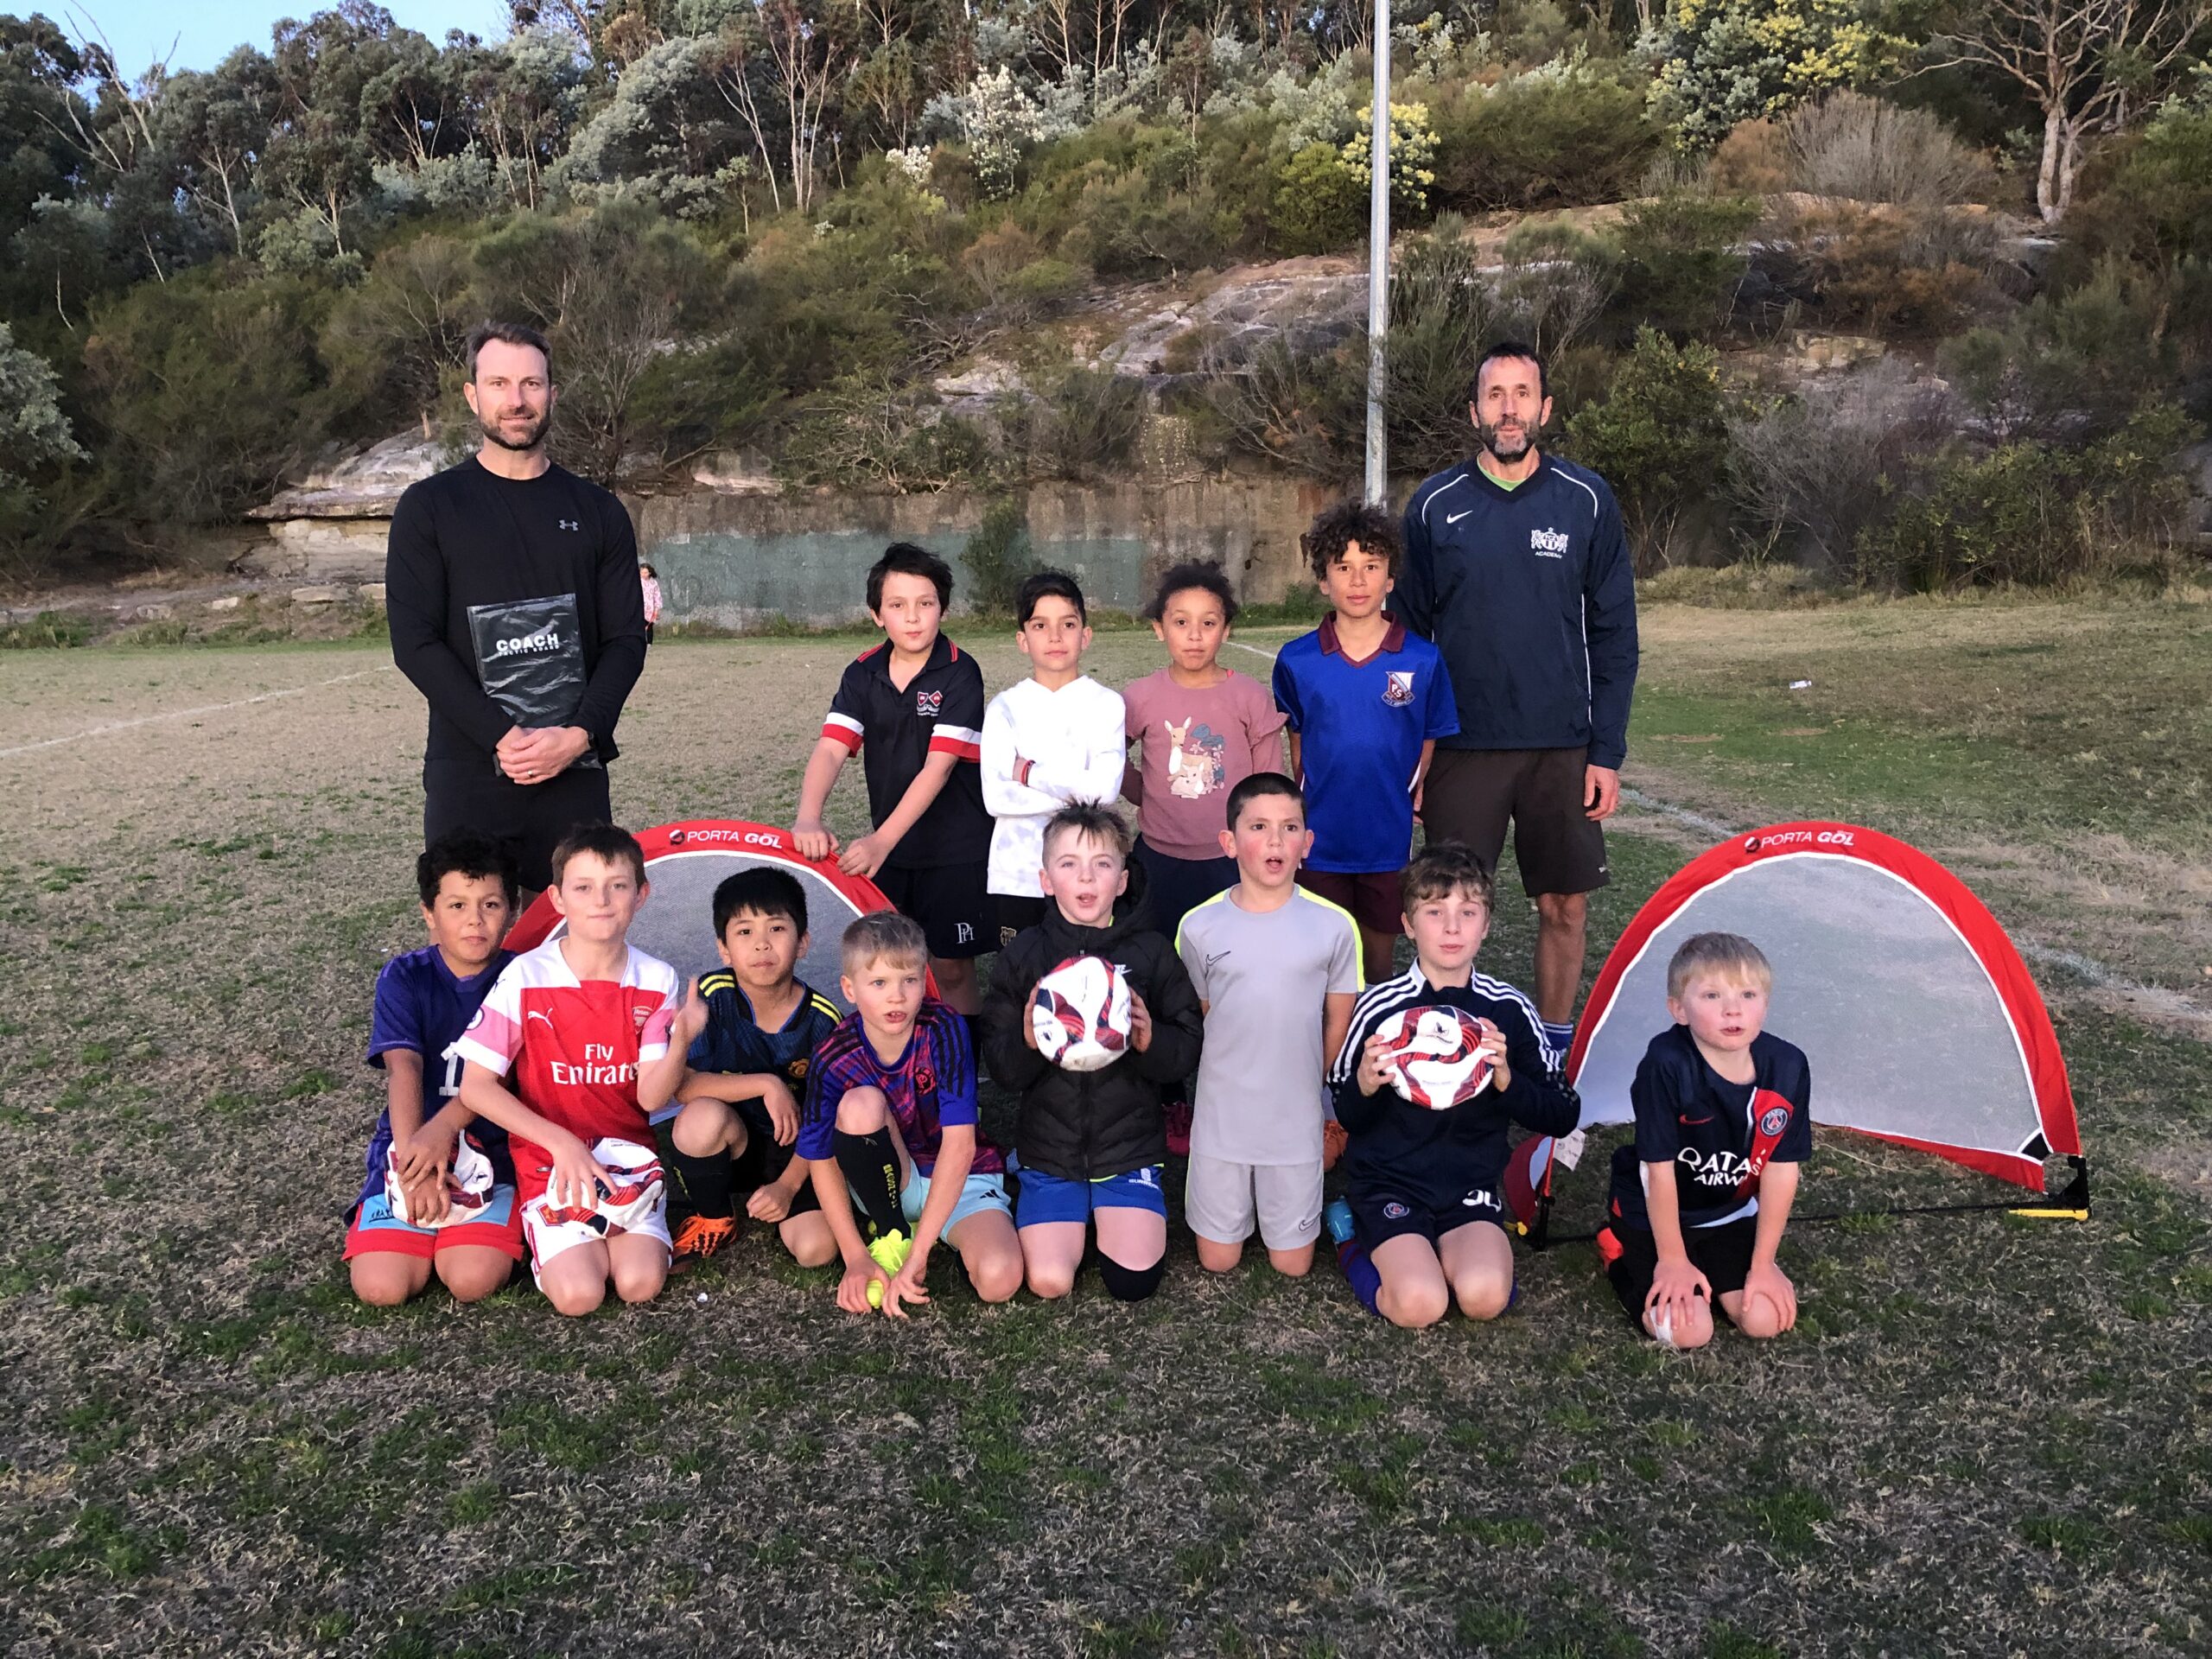 This week we'd like to acknowledge Michele Addelio who coaches the U9 Blue Tongues at Beacon Hill, who is assisted by Matt Bealey.